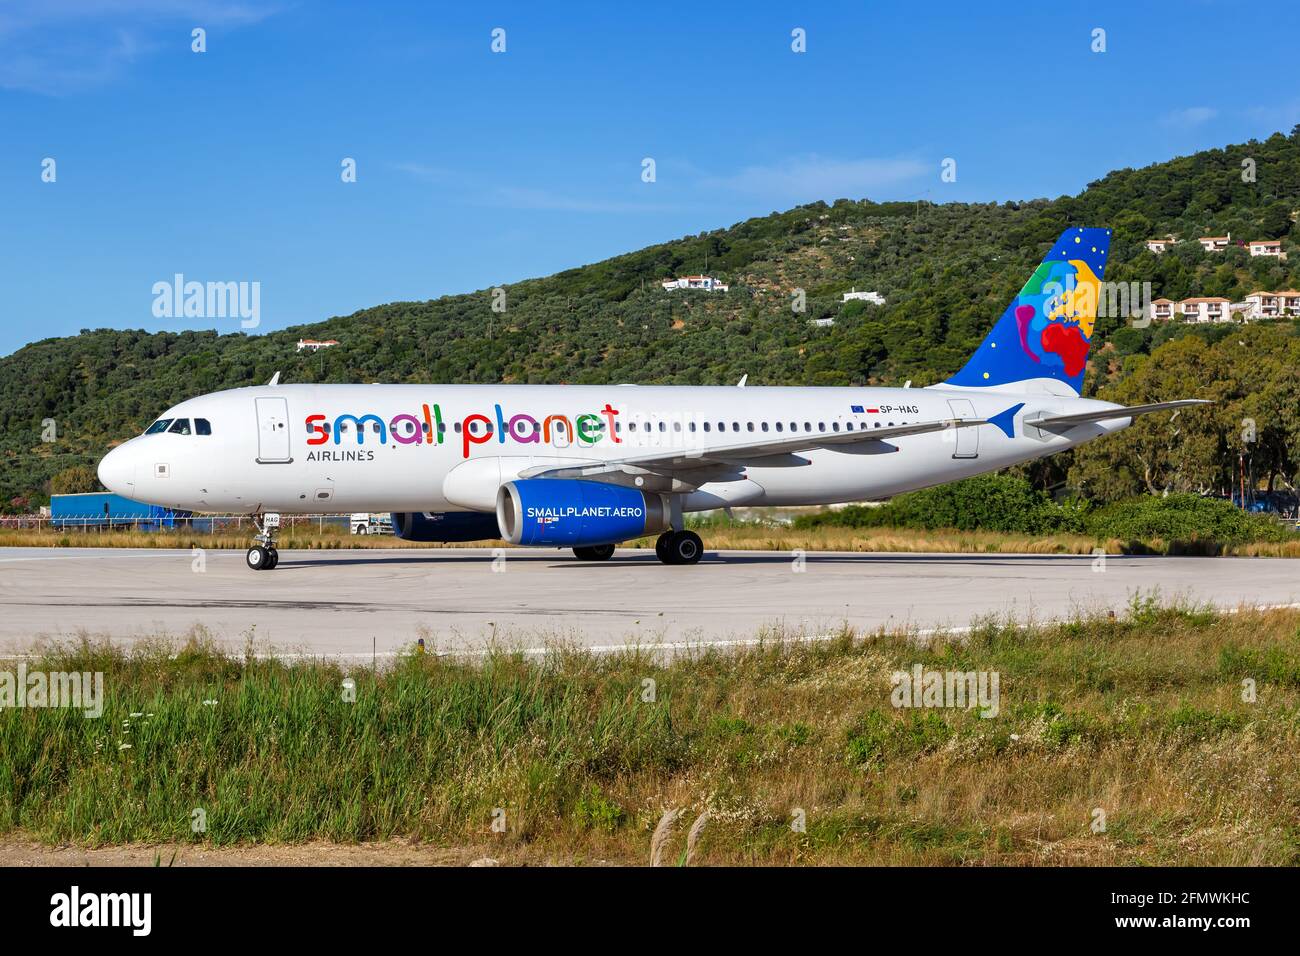 Skiathos, Greece - June 4, 2016: Small Planet Airlines Airbus A320 airplane at Skiathos airport (JSI) in Greece. Stock Photo